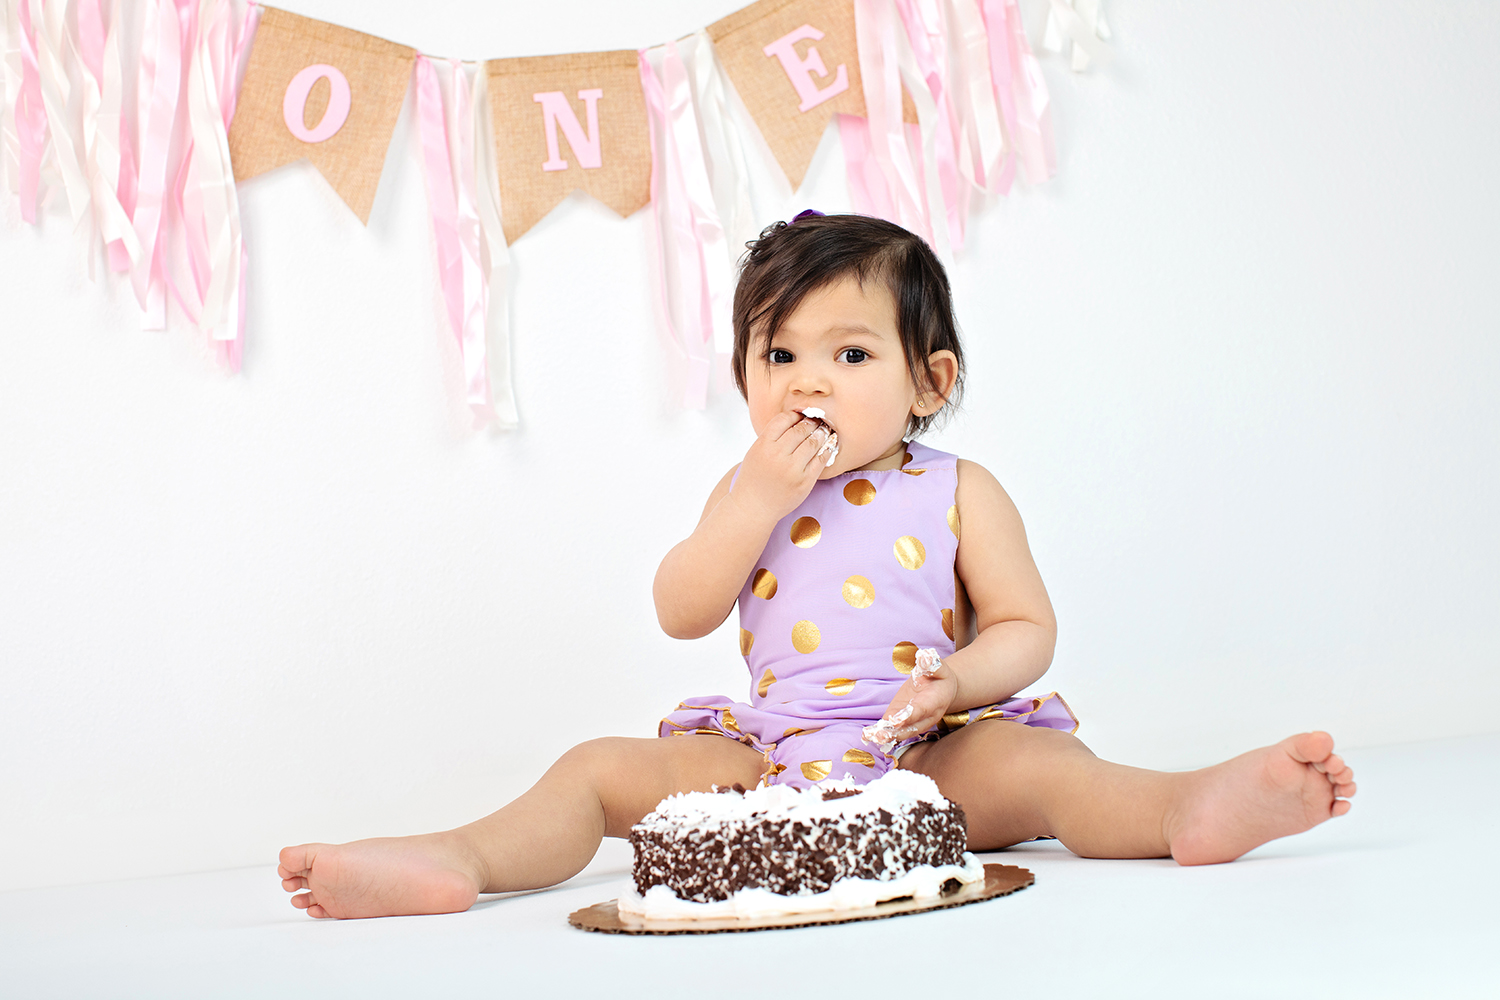 Adorable Baby Celebrating First Birthday with Cake Smash